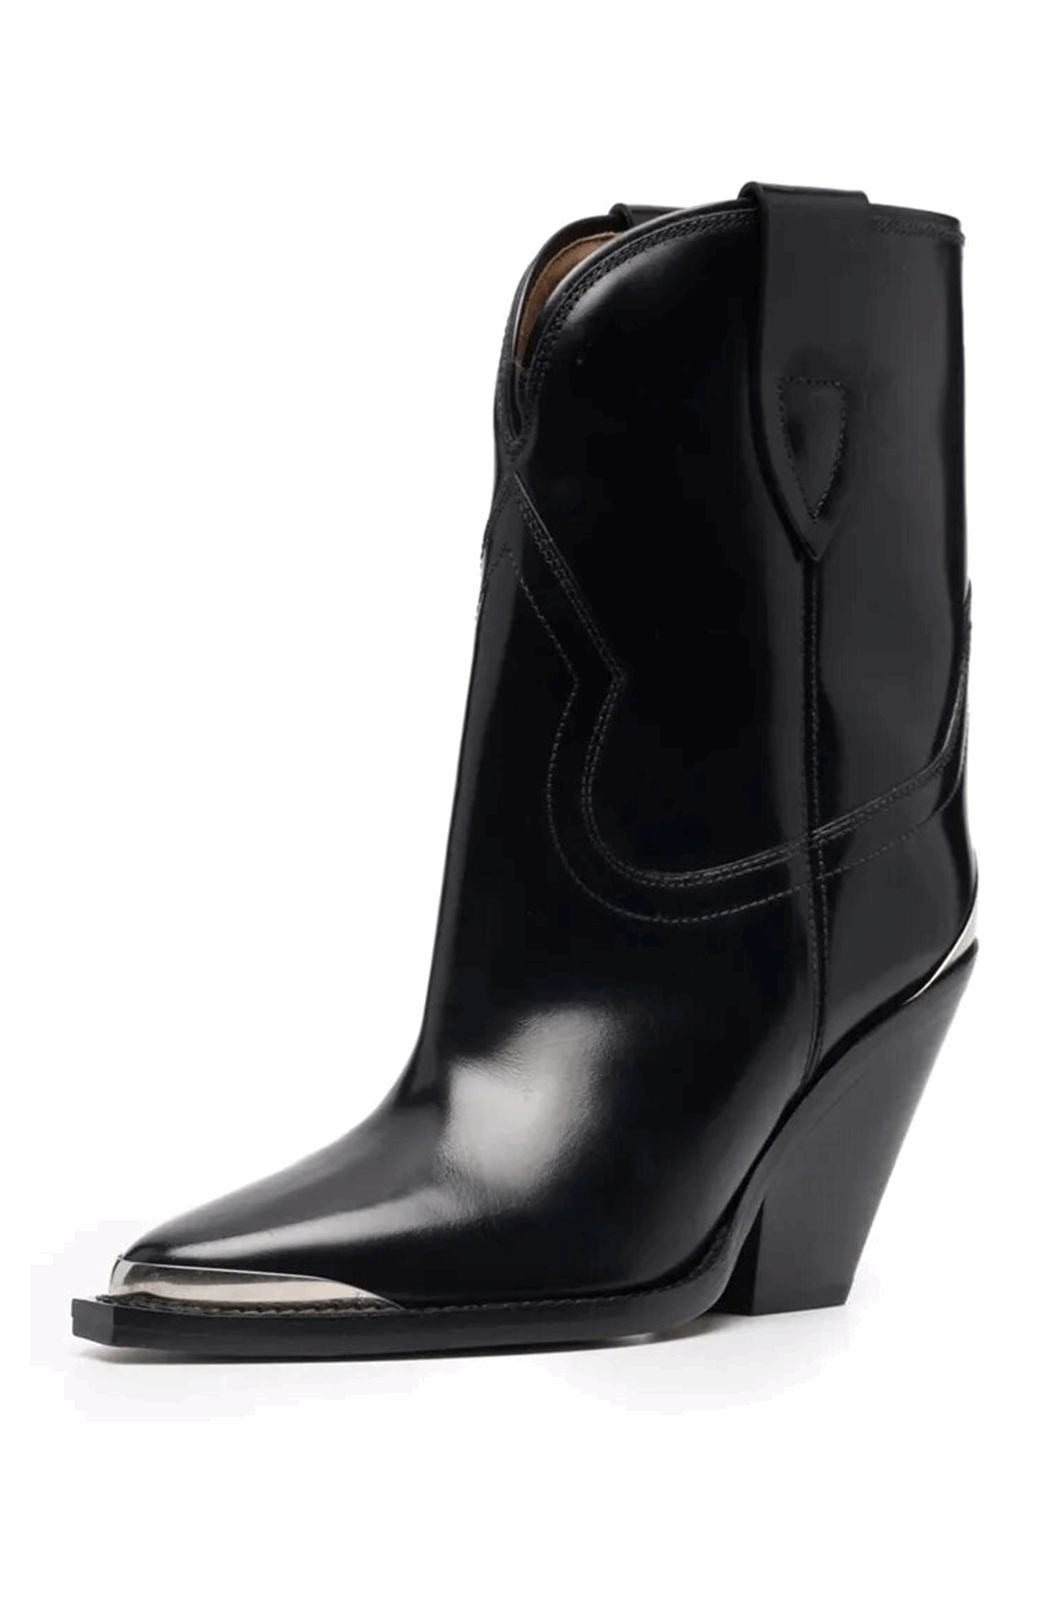 Black western ankle boots